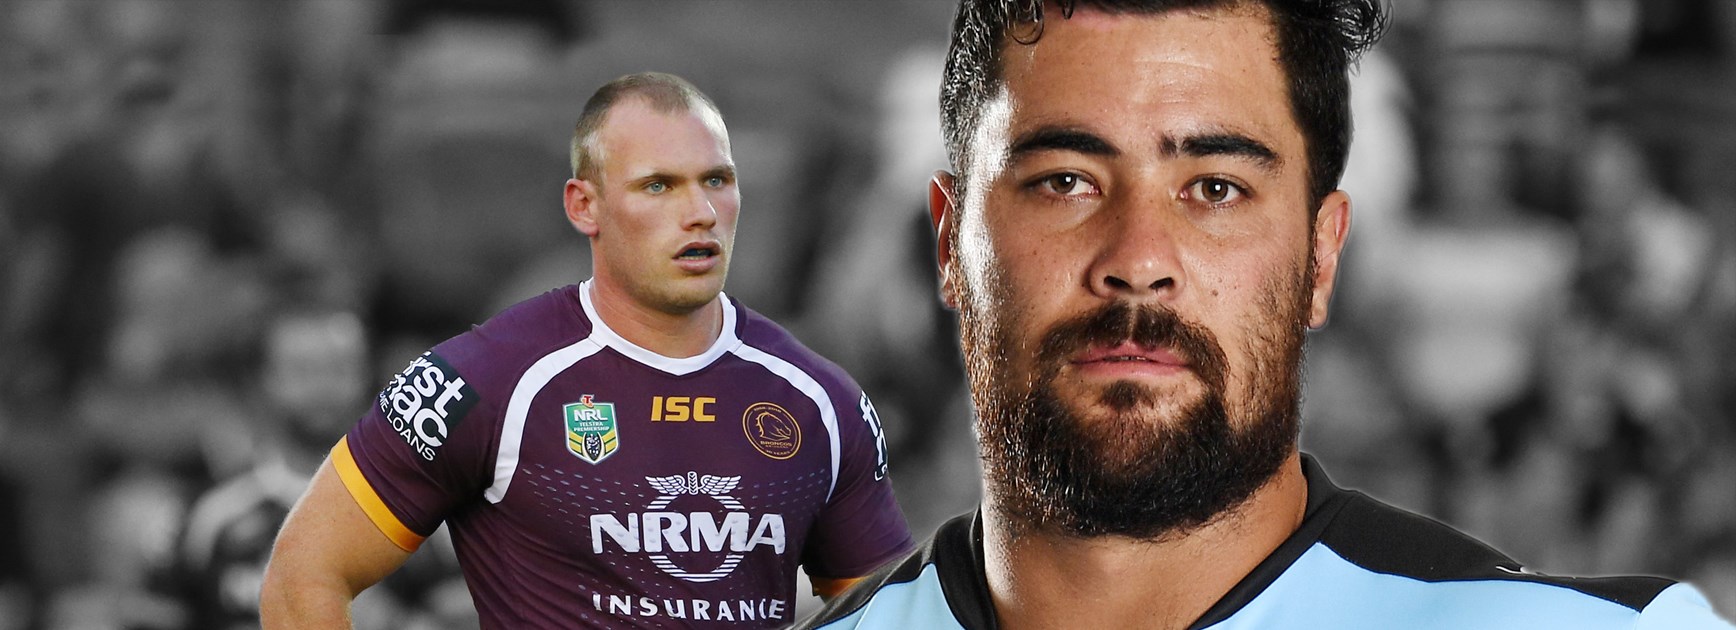 Fifita reveals support for Lodge rehab